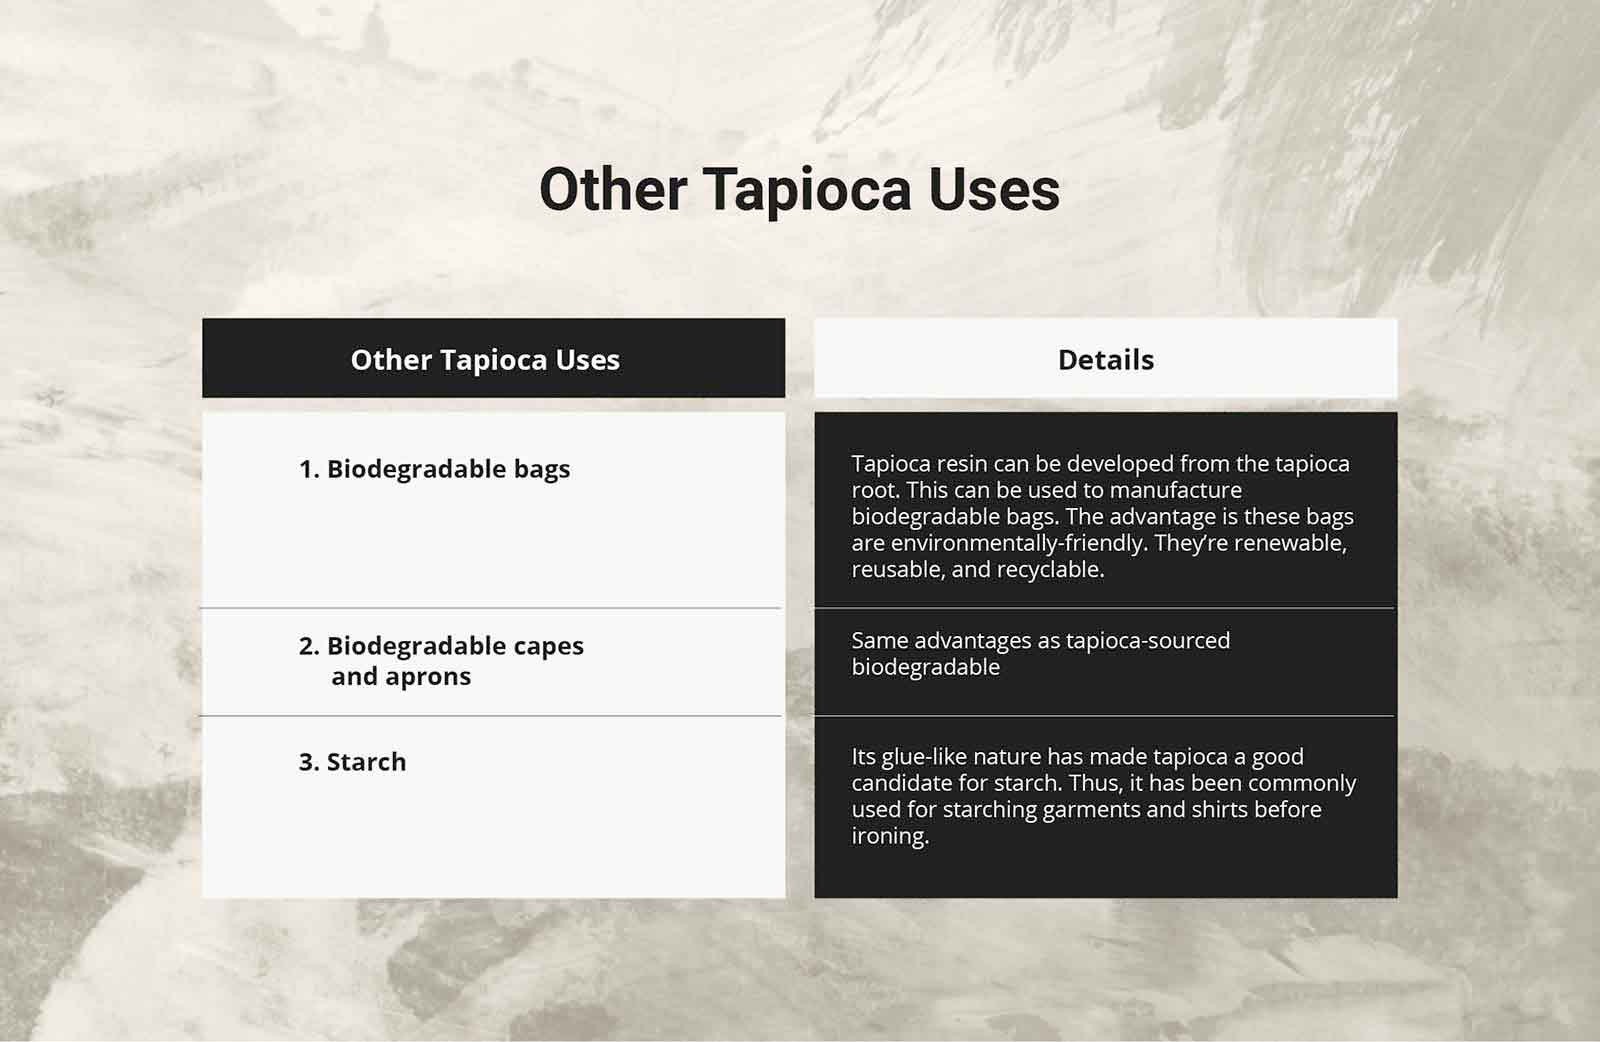 Table 4: Sample Uses of Tapioca Other than Food